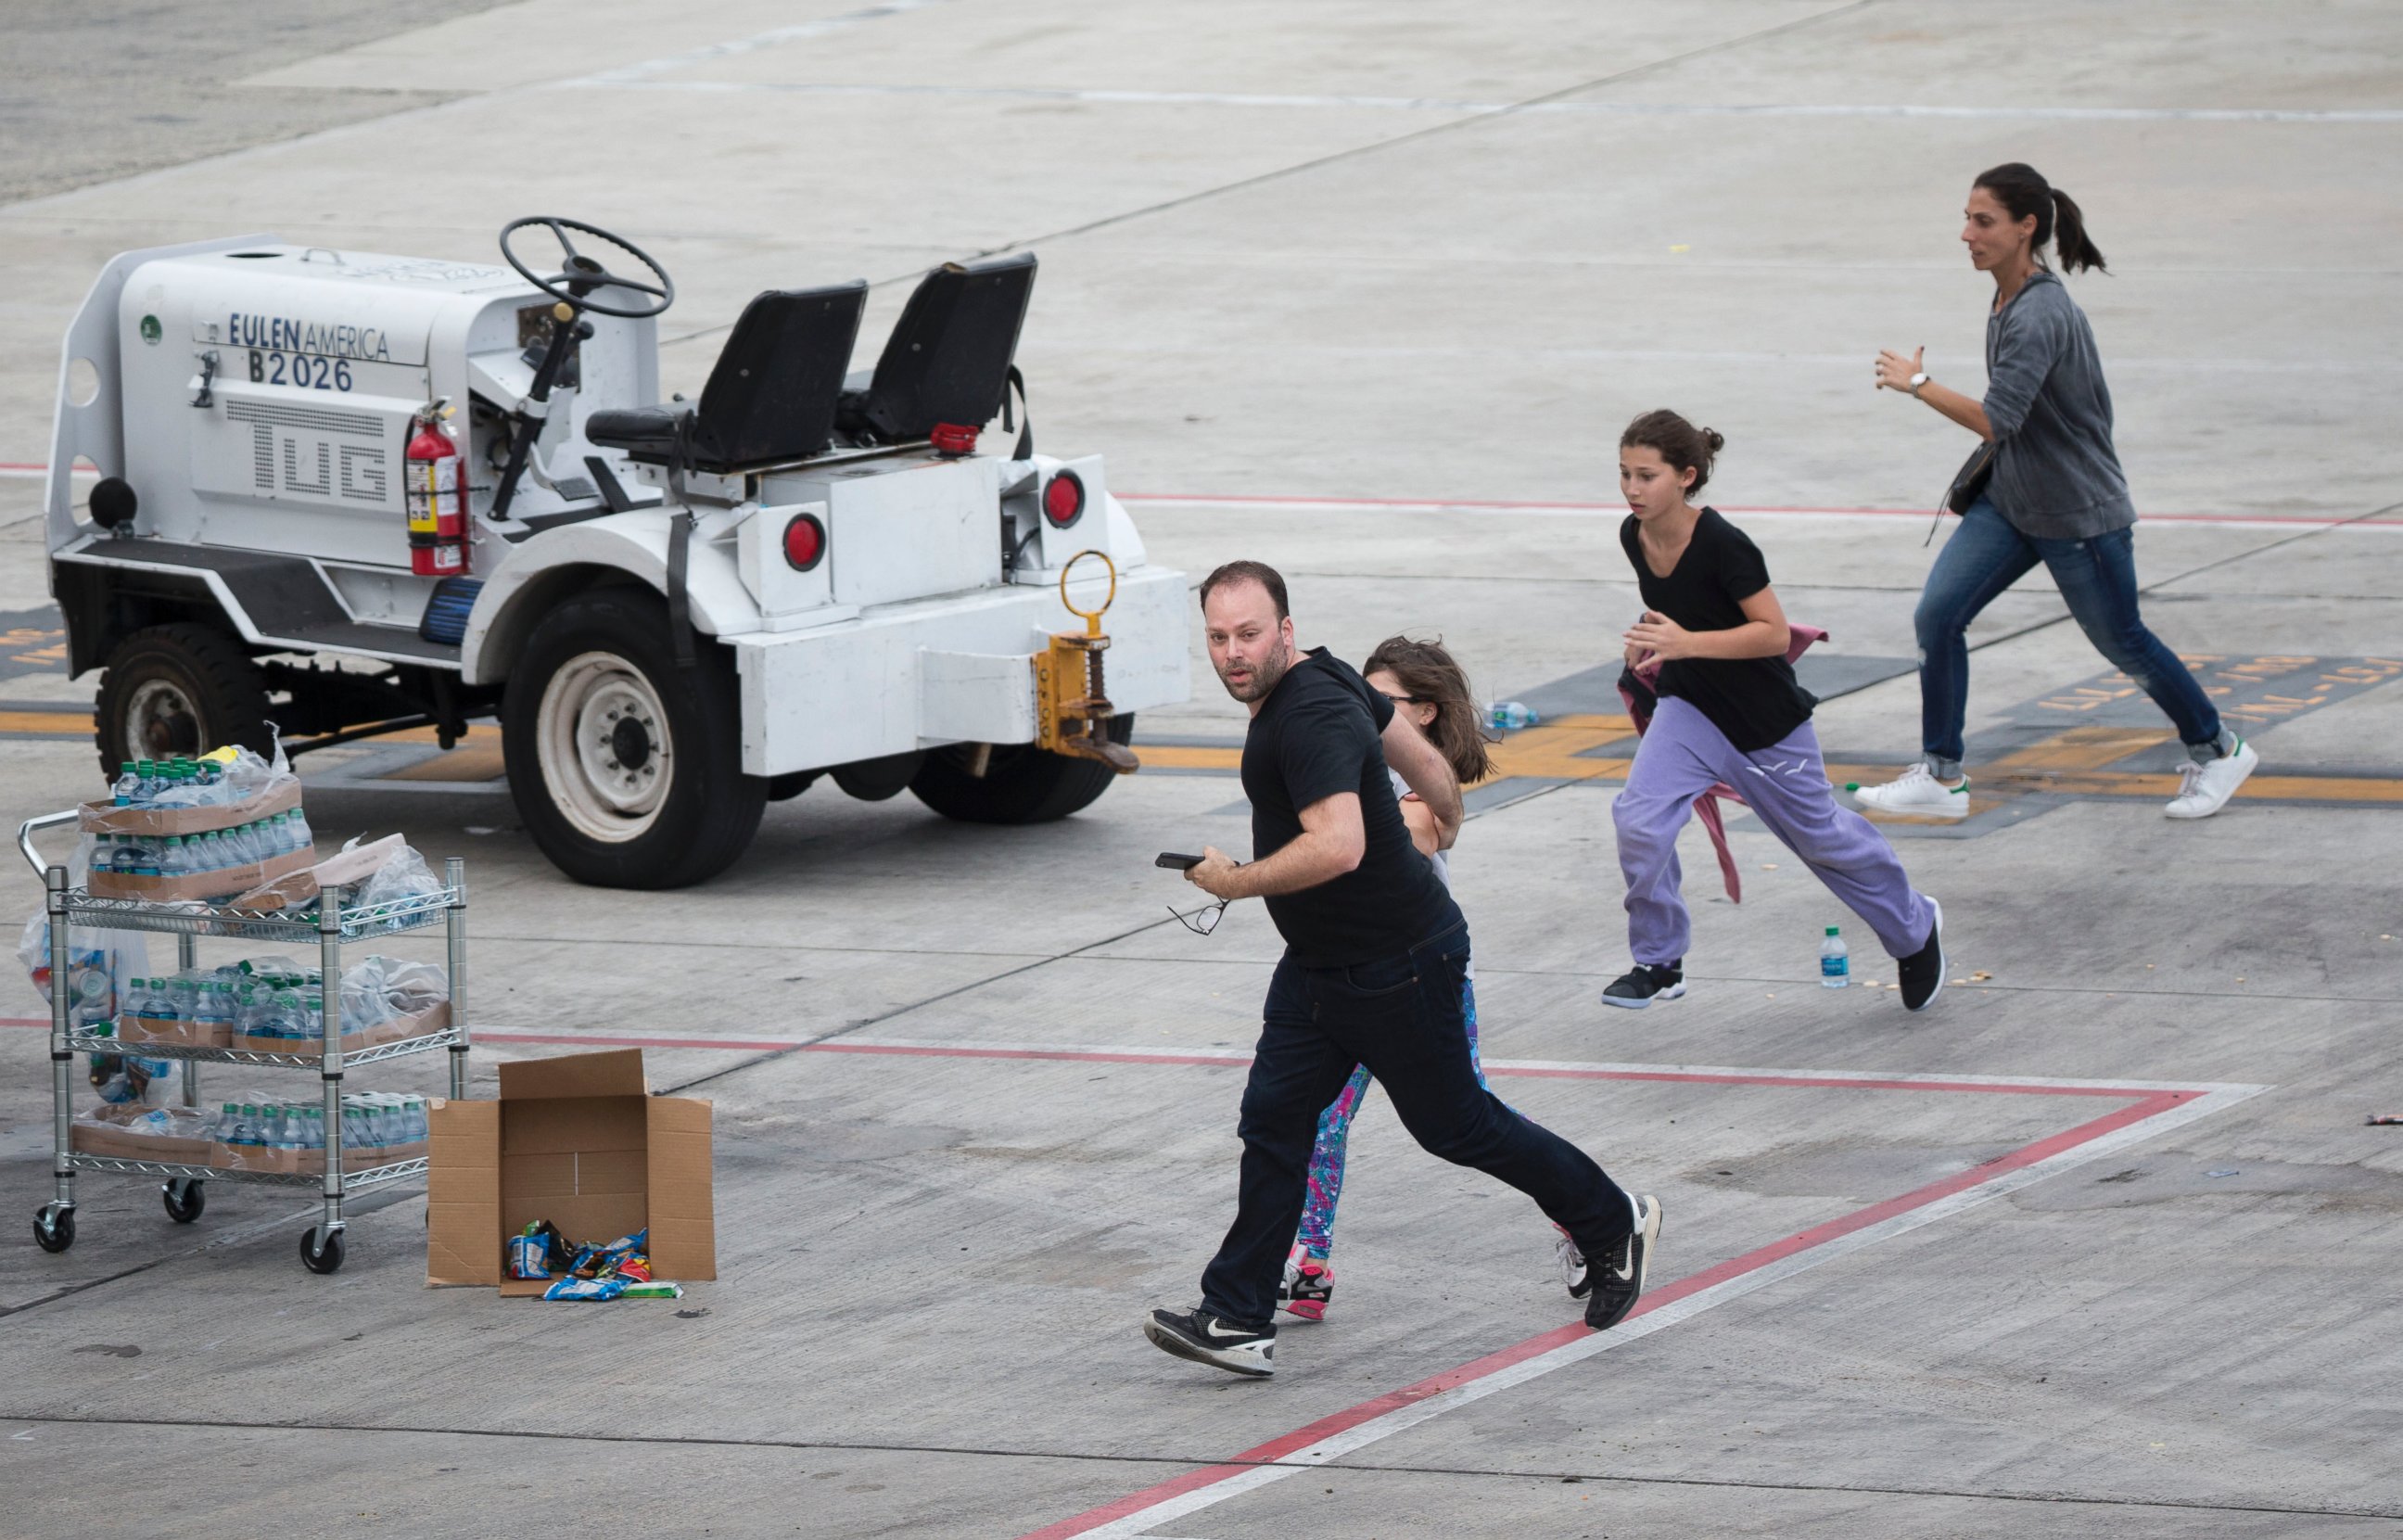 PHOTO: People run on the tarmac at Fort Lauderdale-??Hollywood International Airport, Jan. 6, 2017, in Fort Lauderdale, Flordia, after a shooter opened fire inside a terminal of the airport.